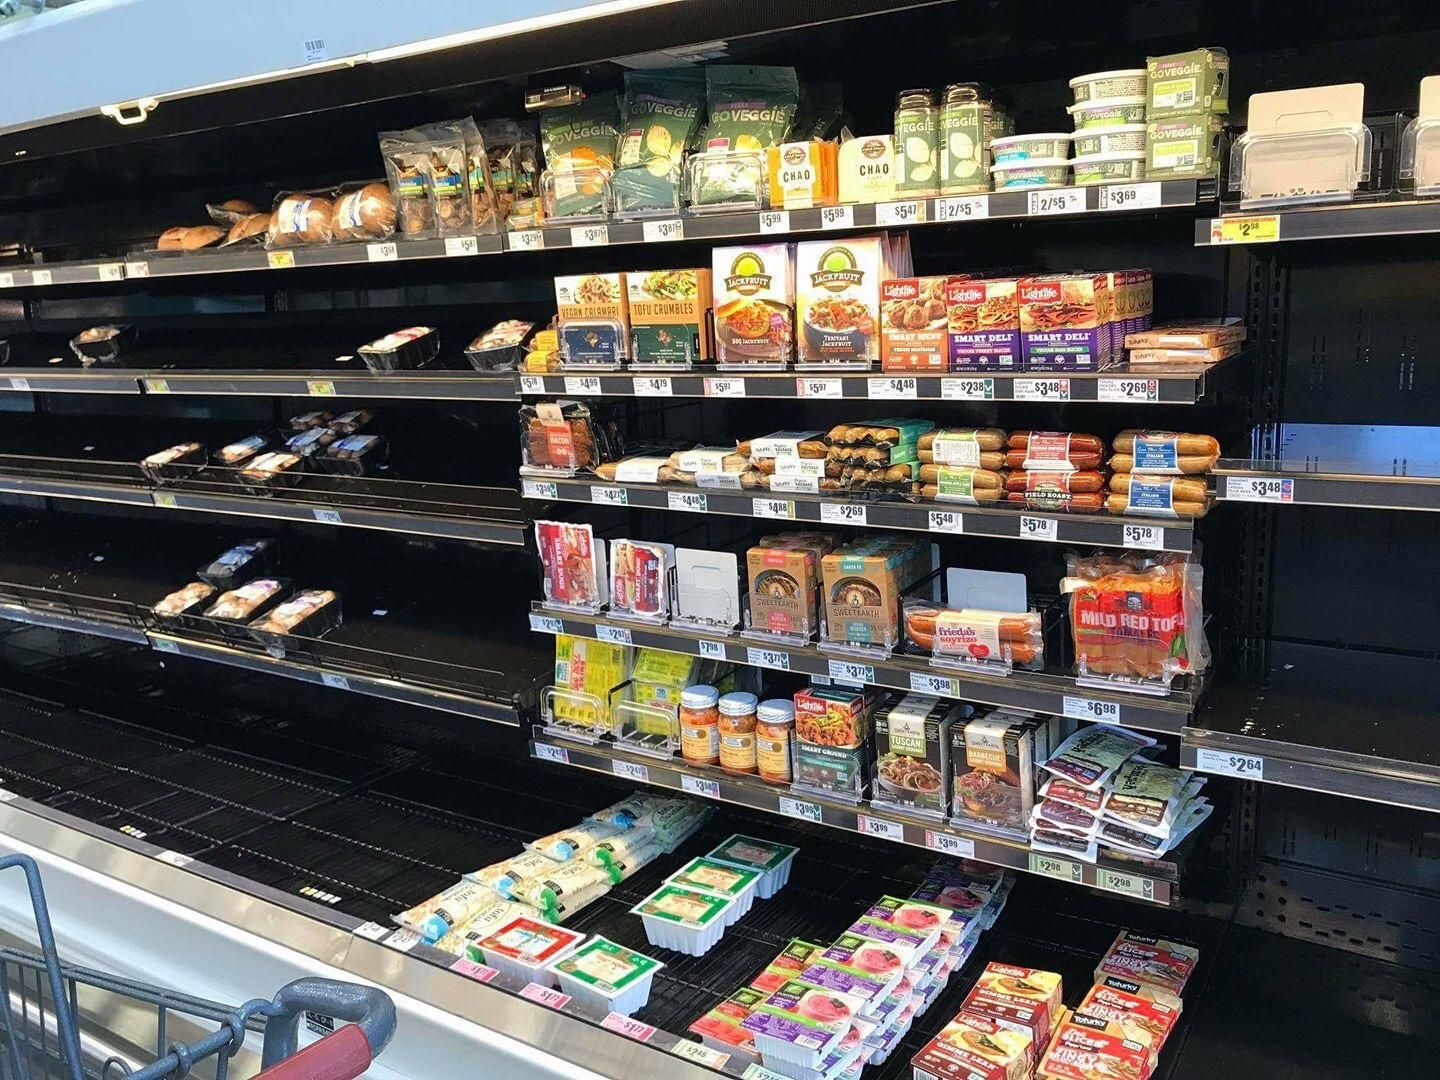 Even with a hurricane approaching, people would rather starve than eat vegan food